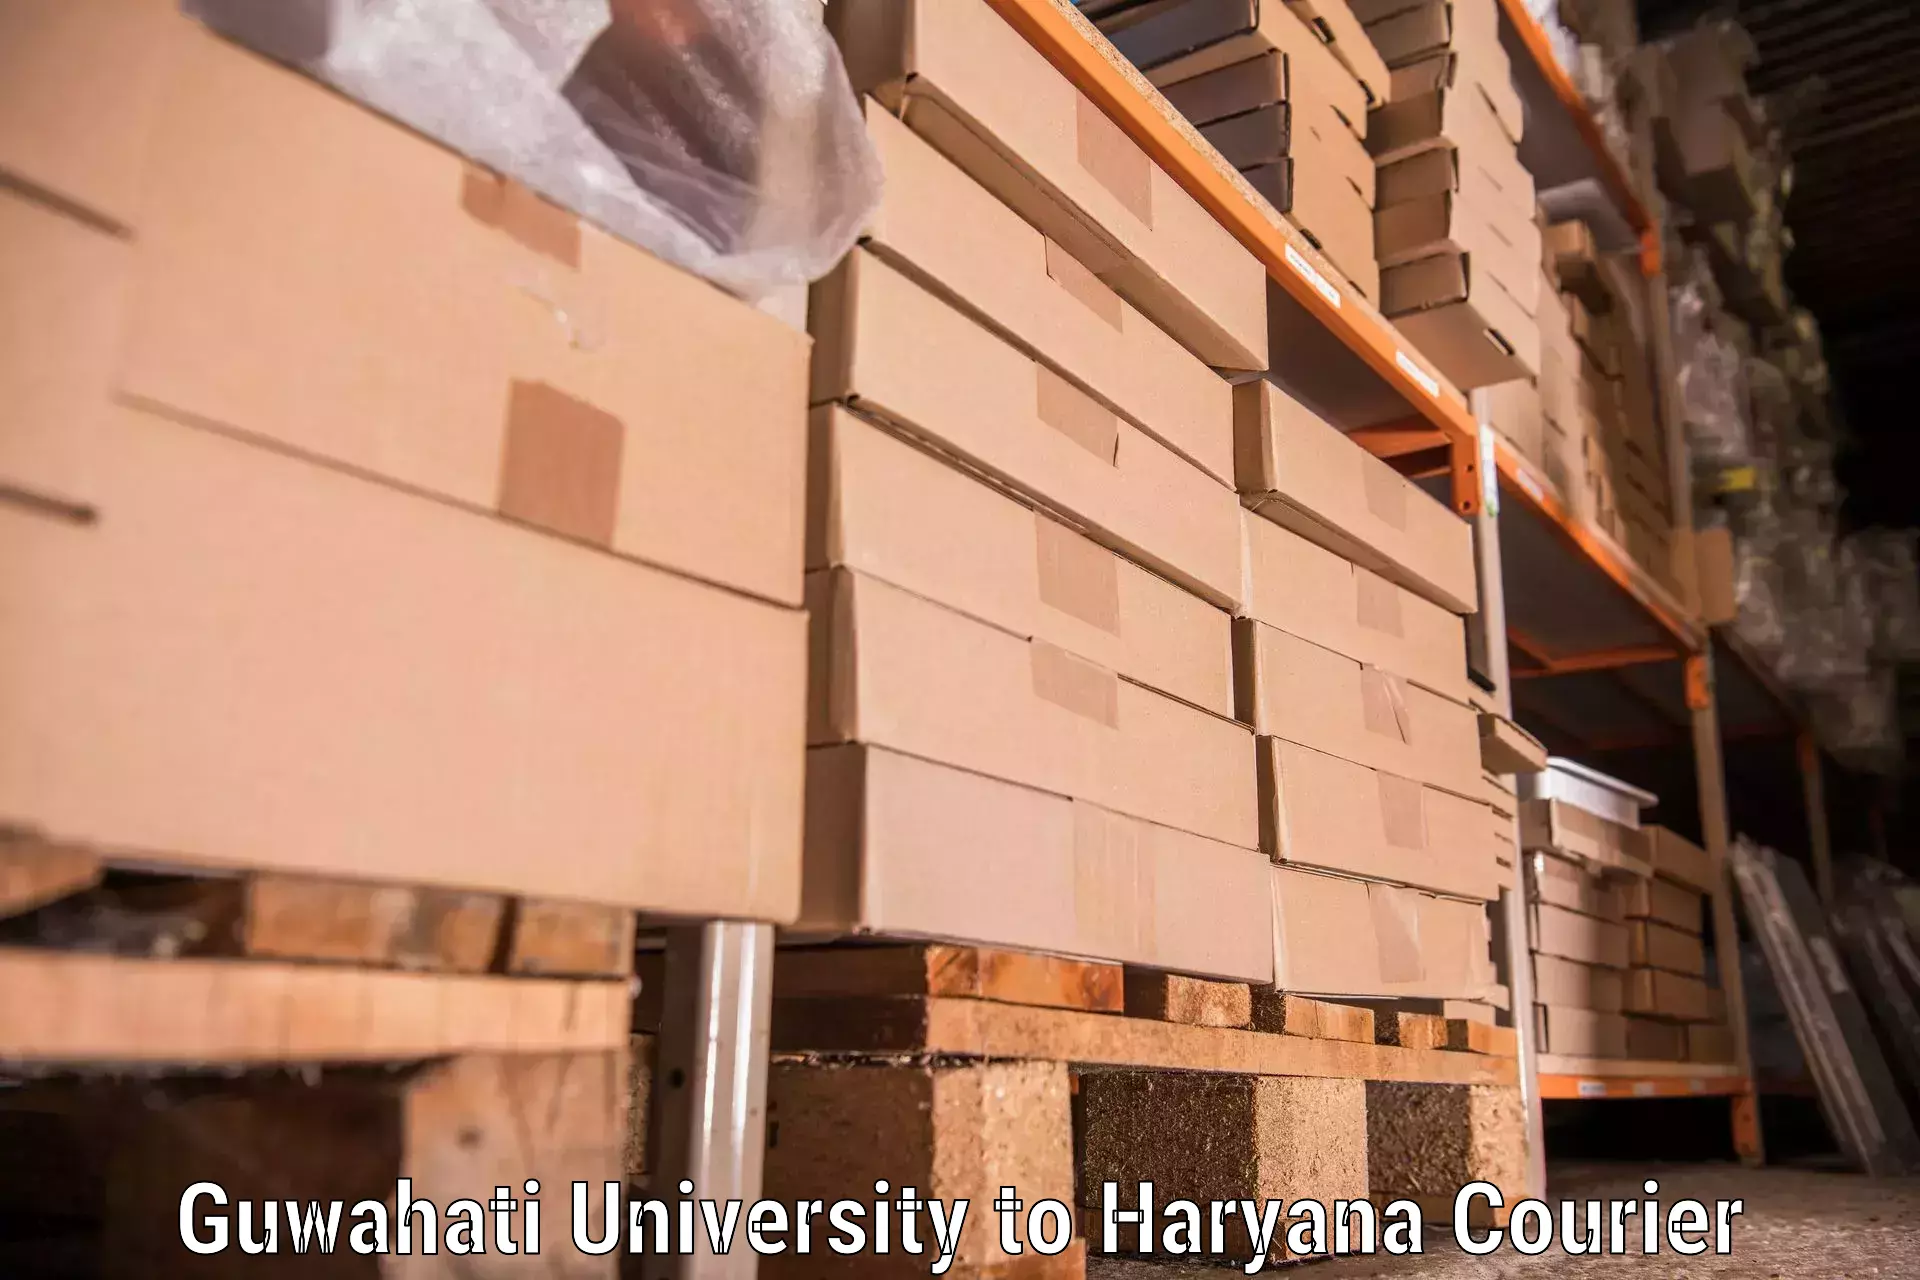 Furniture moving specialists Guwahati University to Assandh